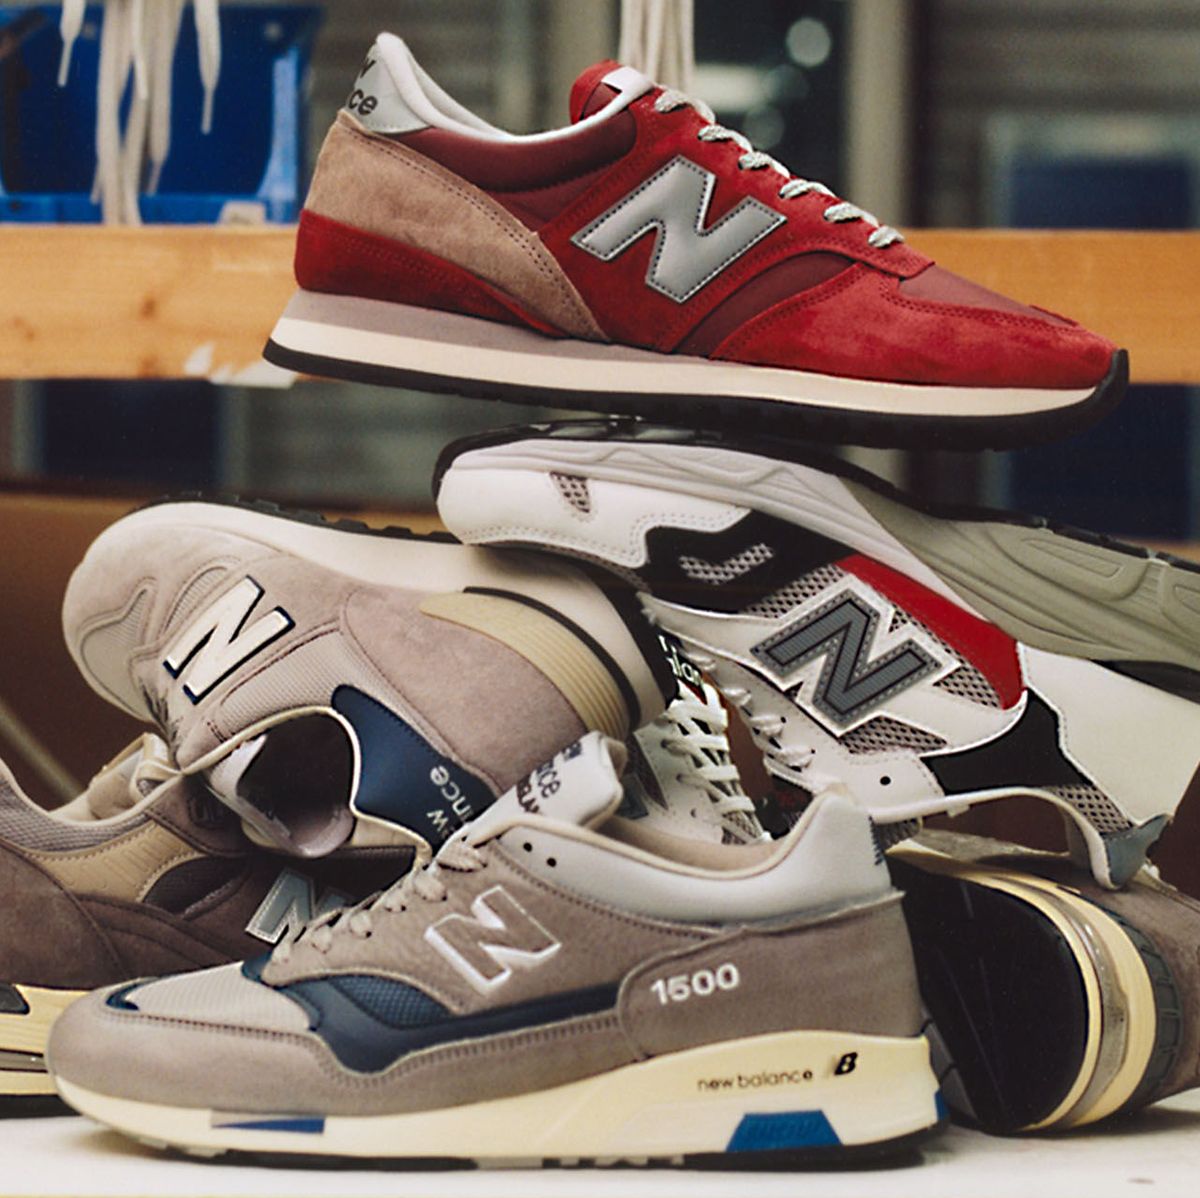 The Complete Guide to New Balance Sneakers: All Explained